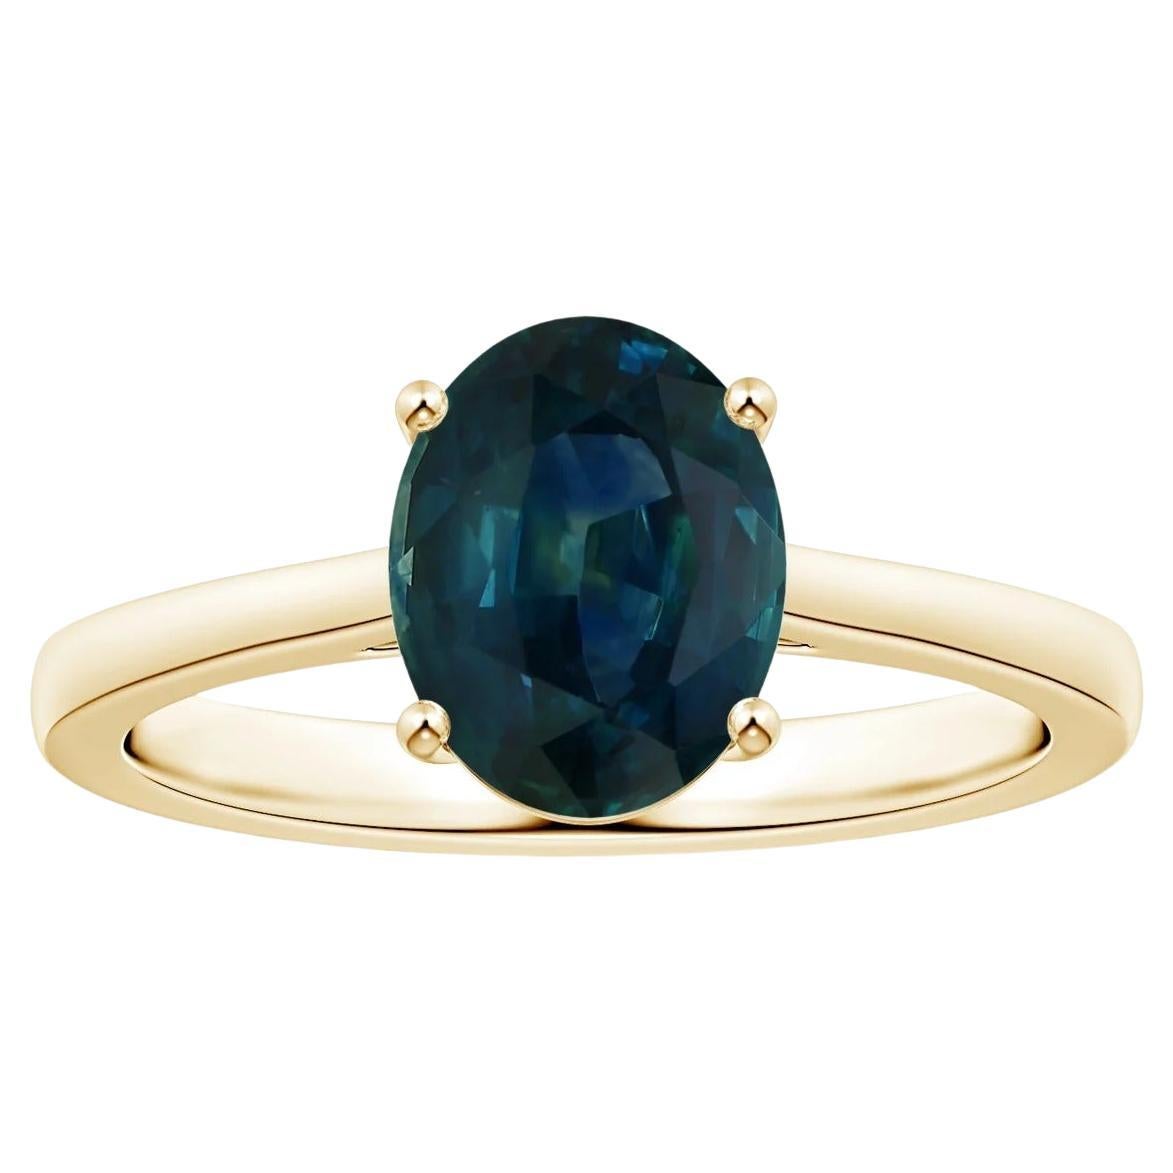 ANGARA GIA Certified Teal Sapphire Ring in Yellow Gold